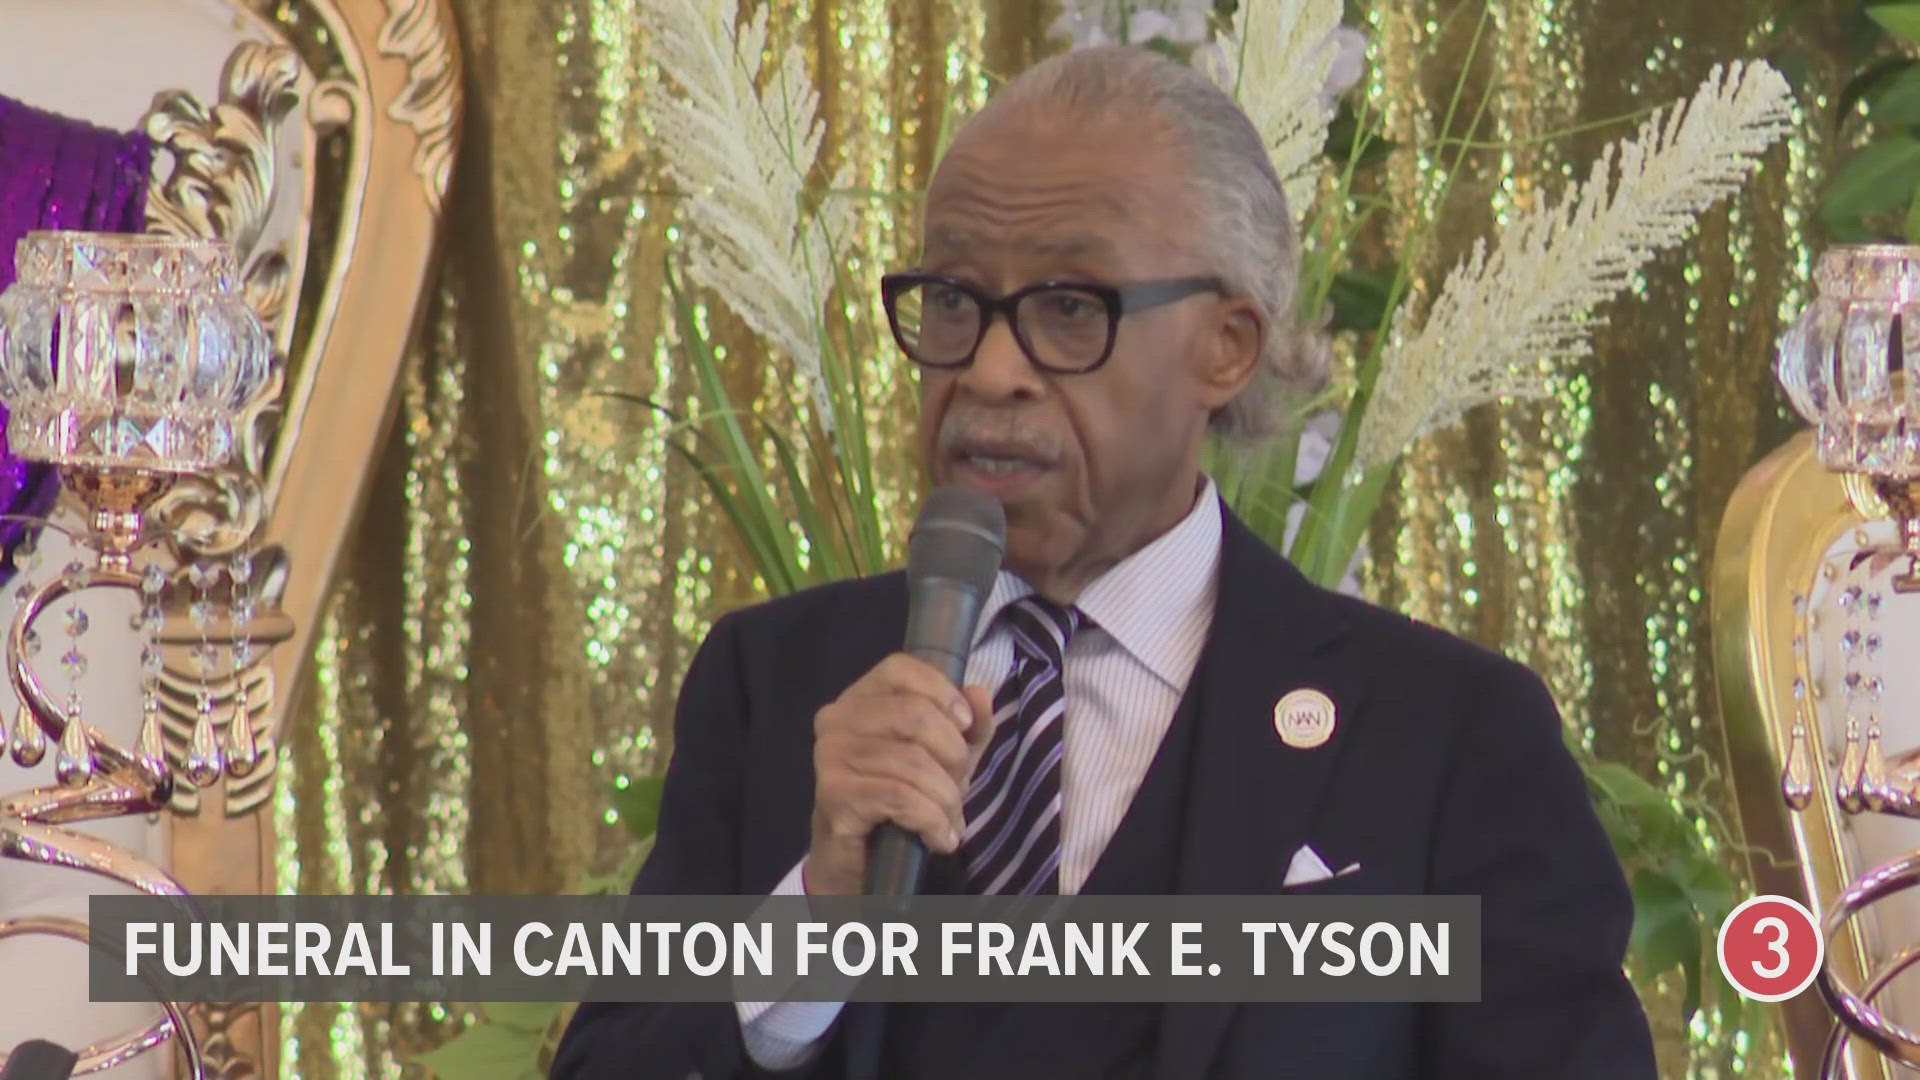 Rev. Al Sharpton was in Canton for the funeral of Frank E. Tyson, the man who died in police custody.